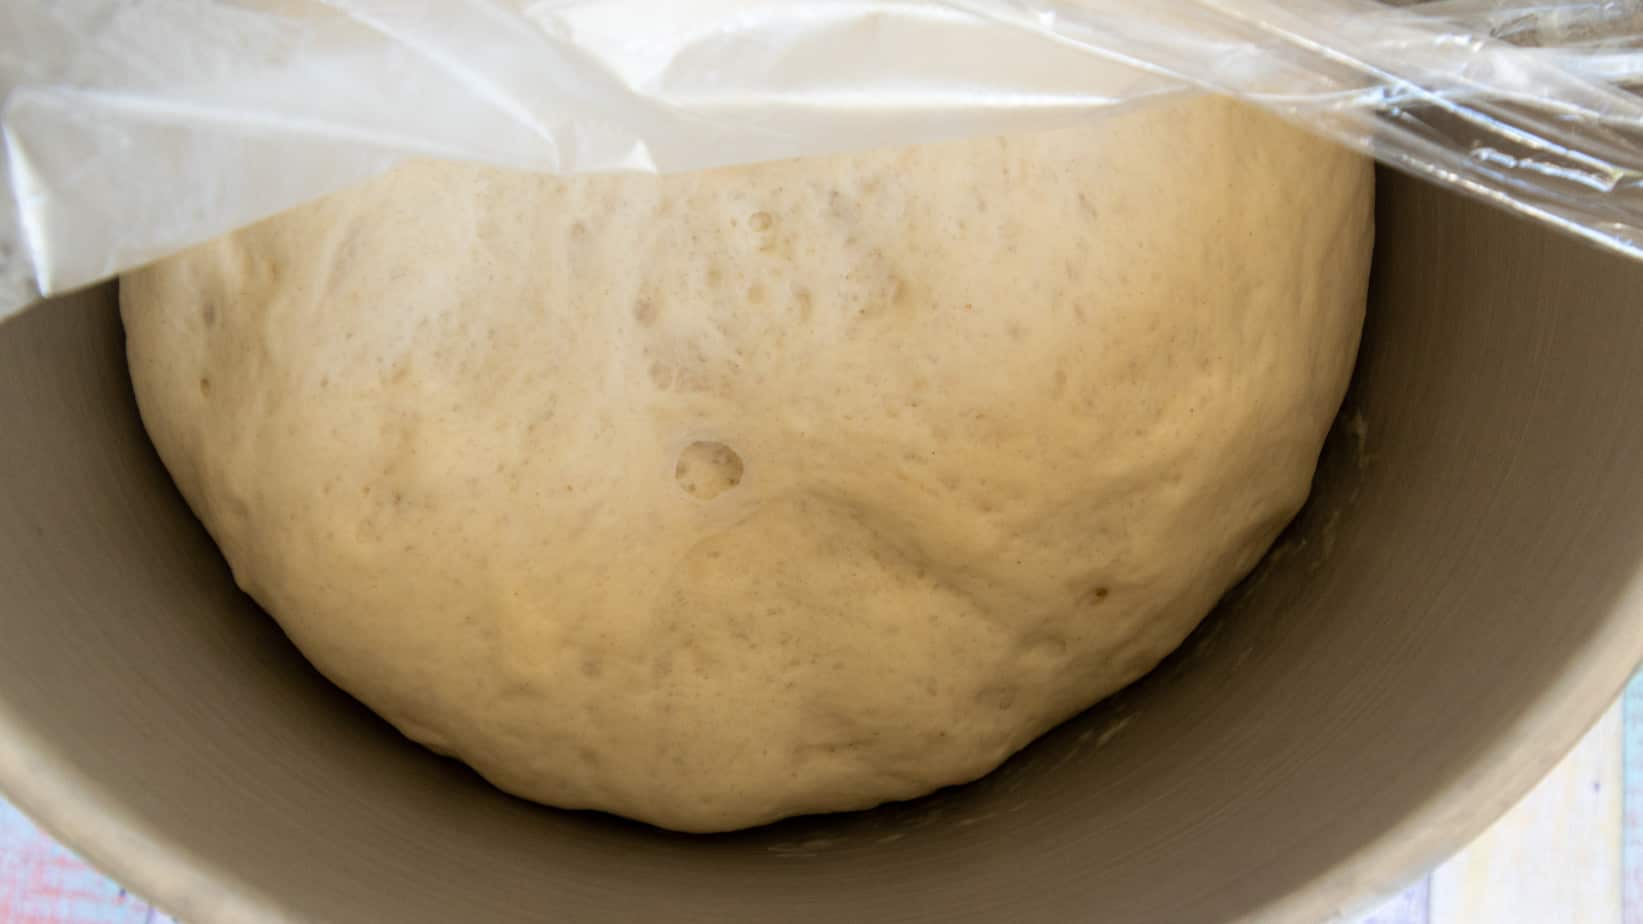 Dough proofing. Dough fermenting in bowl